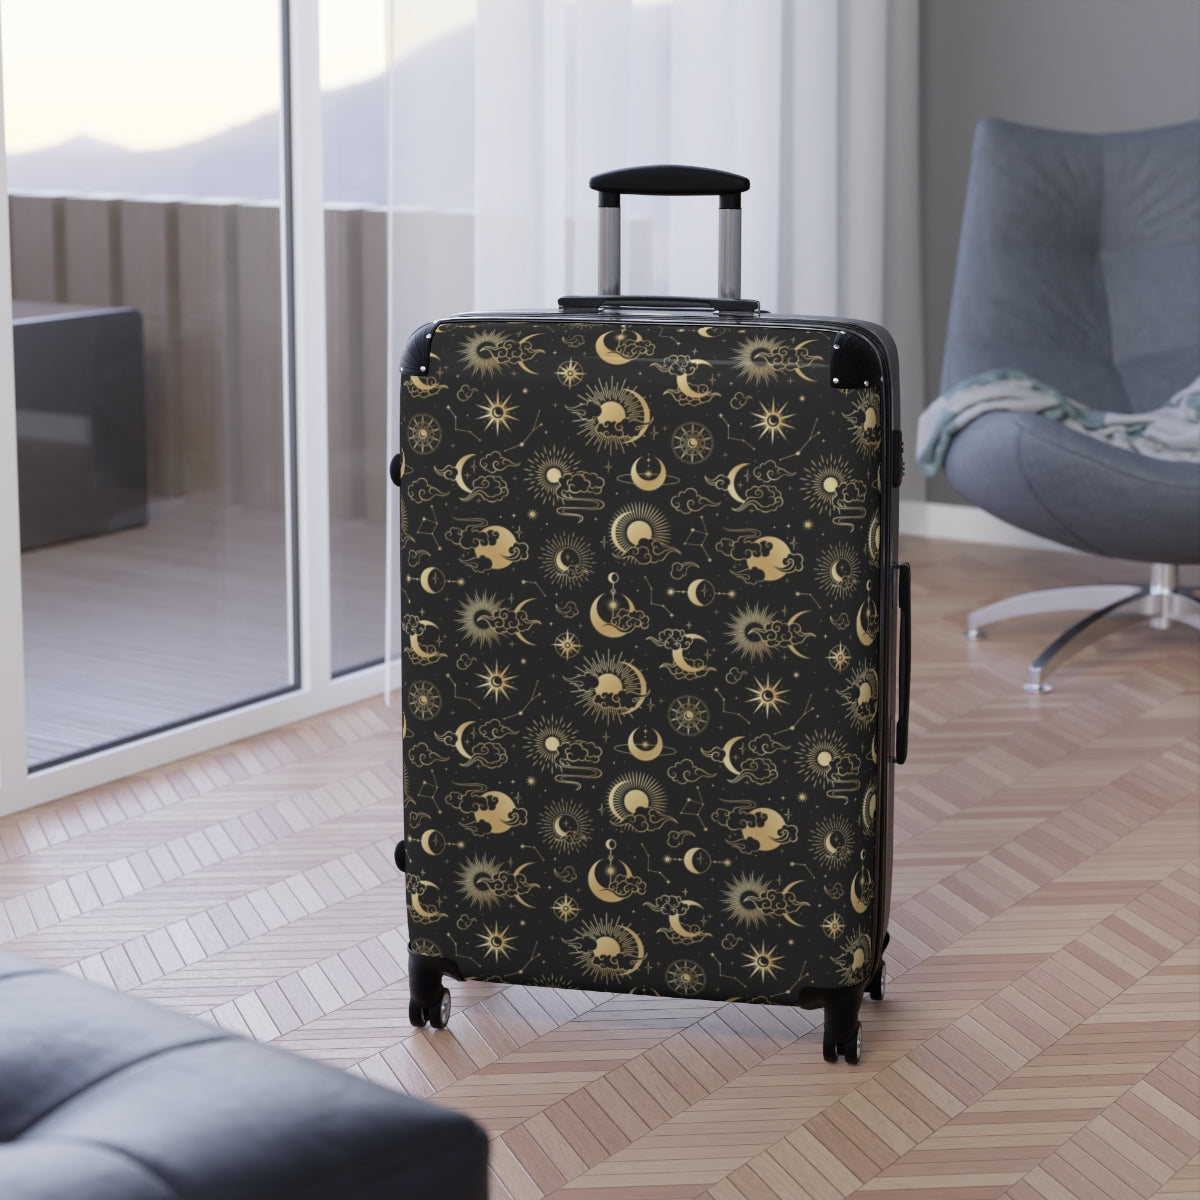 Moon Sun Suitcase Luggage, Constellation Celestial Carry On Cabin Travel Small Large Set Rolling Spinner Designer Hard Shell Wheels Case Starcove Fashion